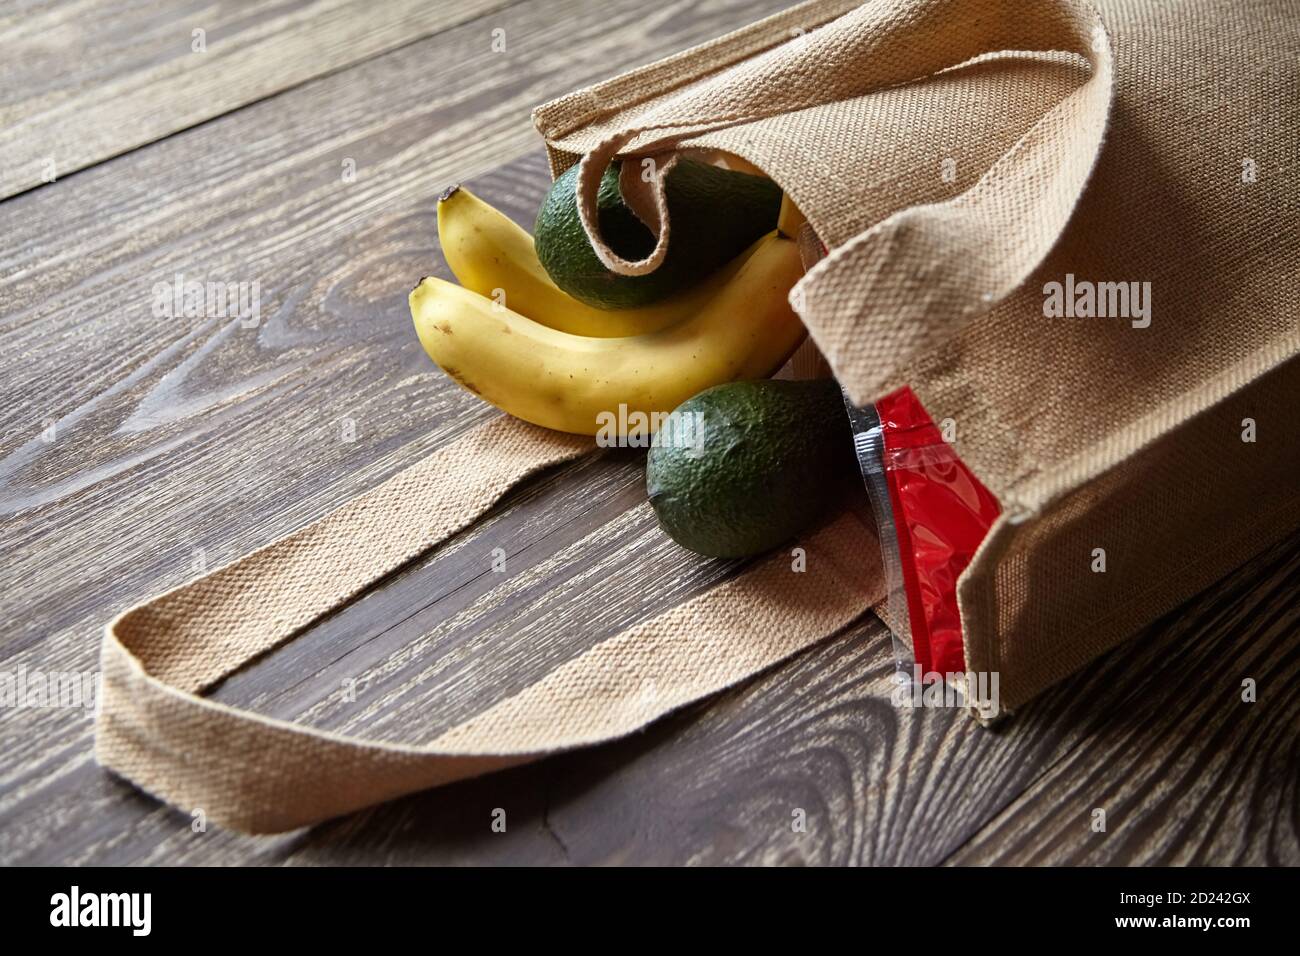 Reusable shopping bag with fresh fruits. Natural eco friendly material. Products from the store. Yellow bananas, green avocado, hessian or jute sack o Stock Photo